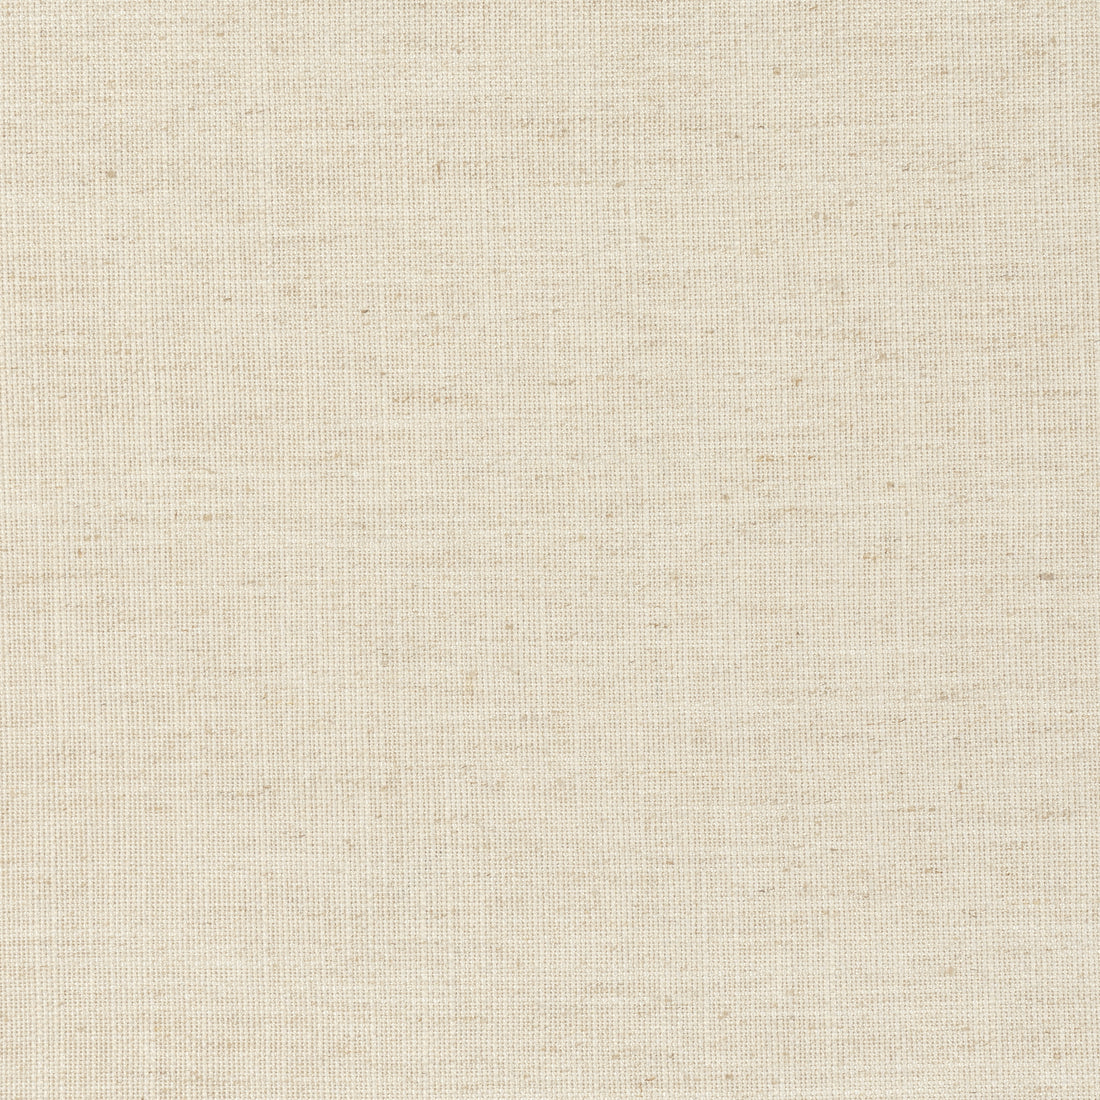 Terra Linen fabric in flax color - pattern number FWW7680 - by Thibaut in the Palisades collection